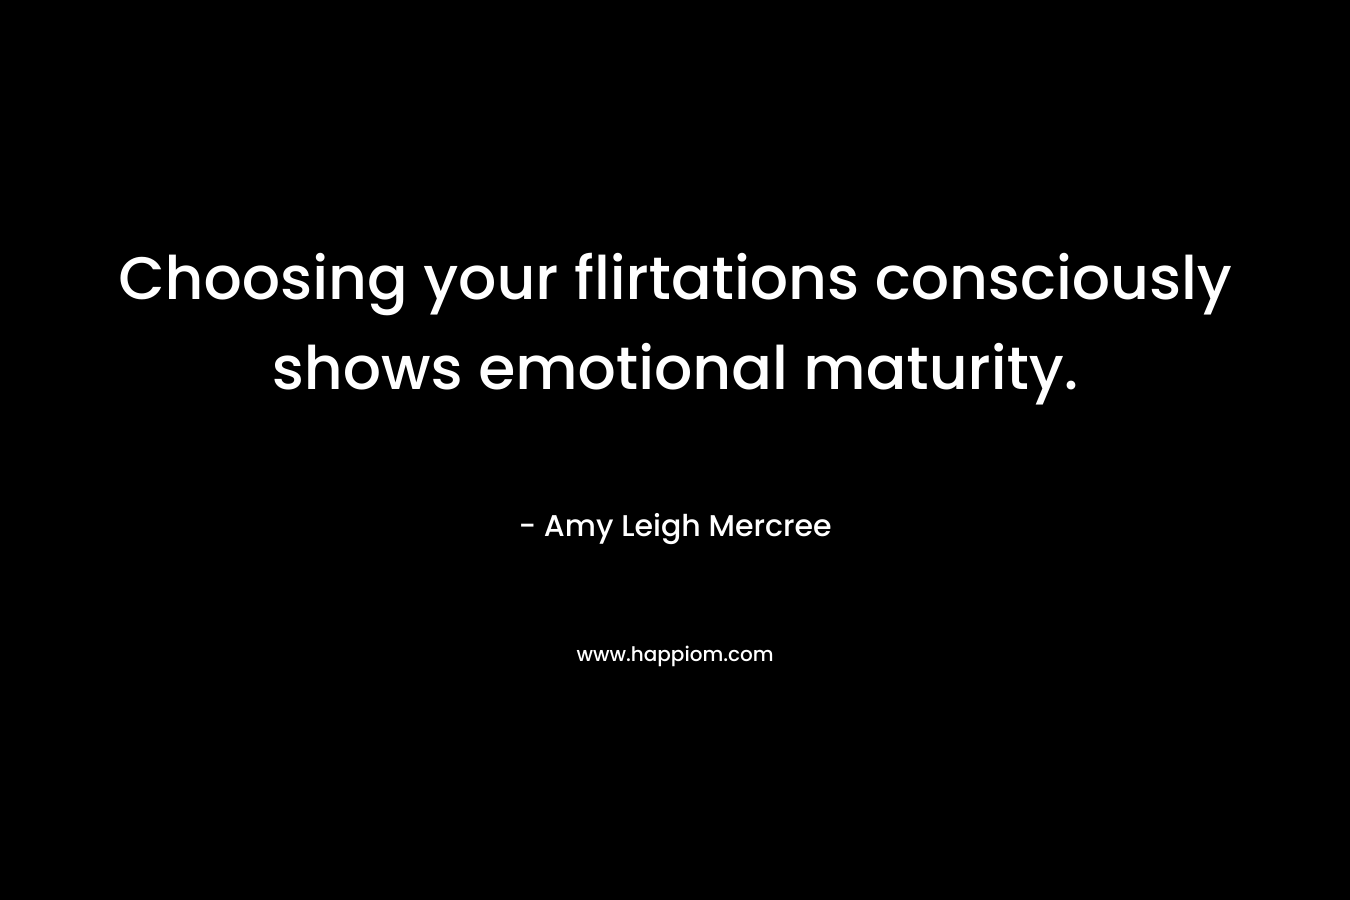 Choosing your flirtations consciously shows emotional maturity. – Amy Leigh Mercree